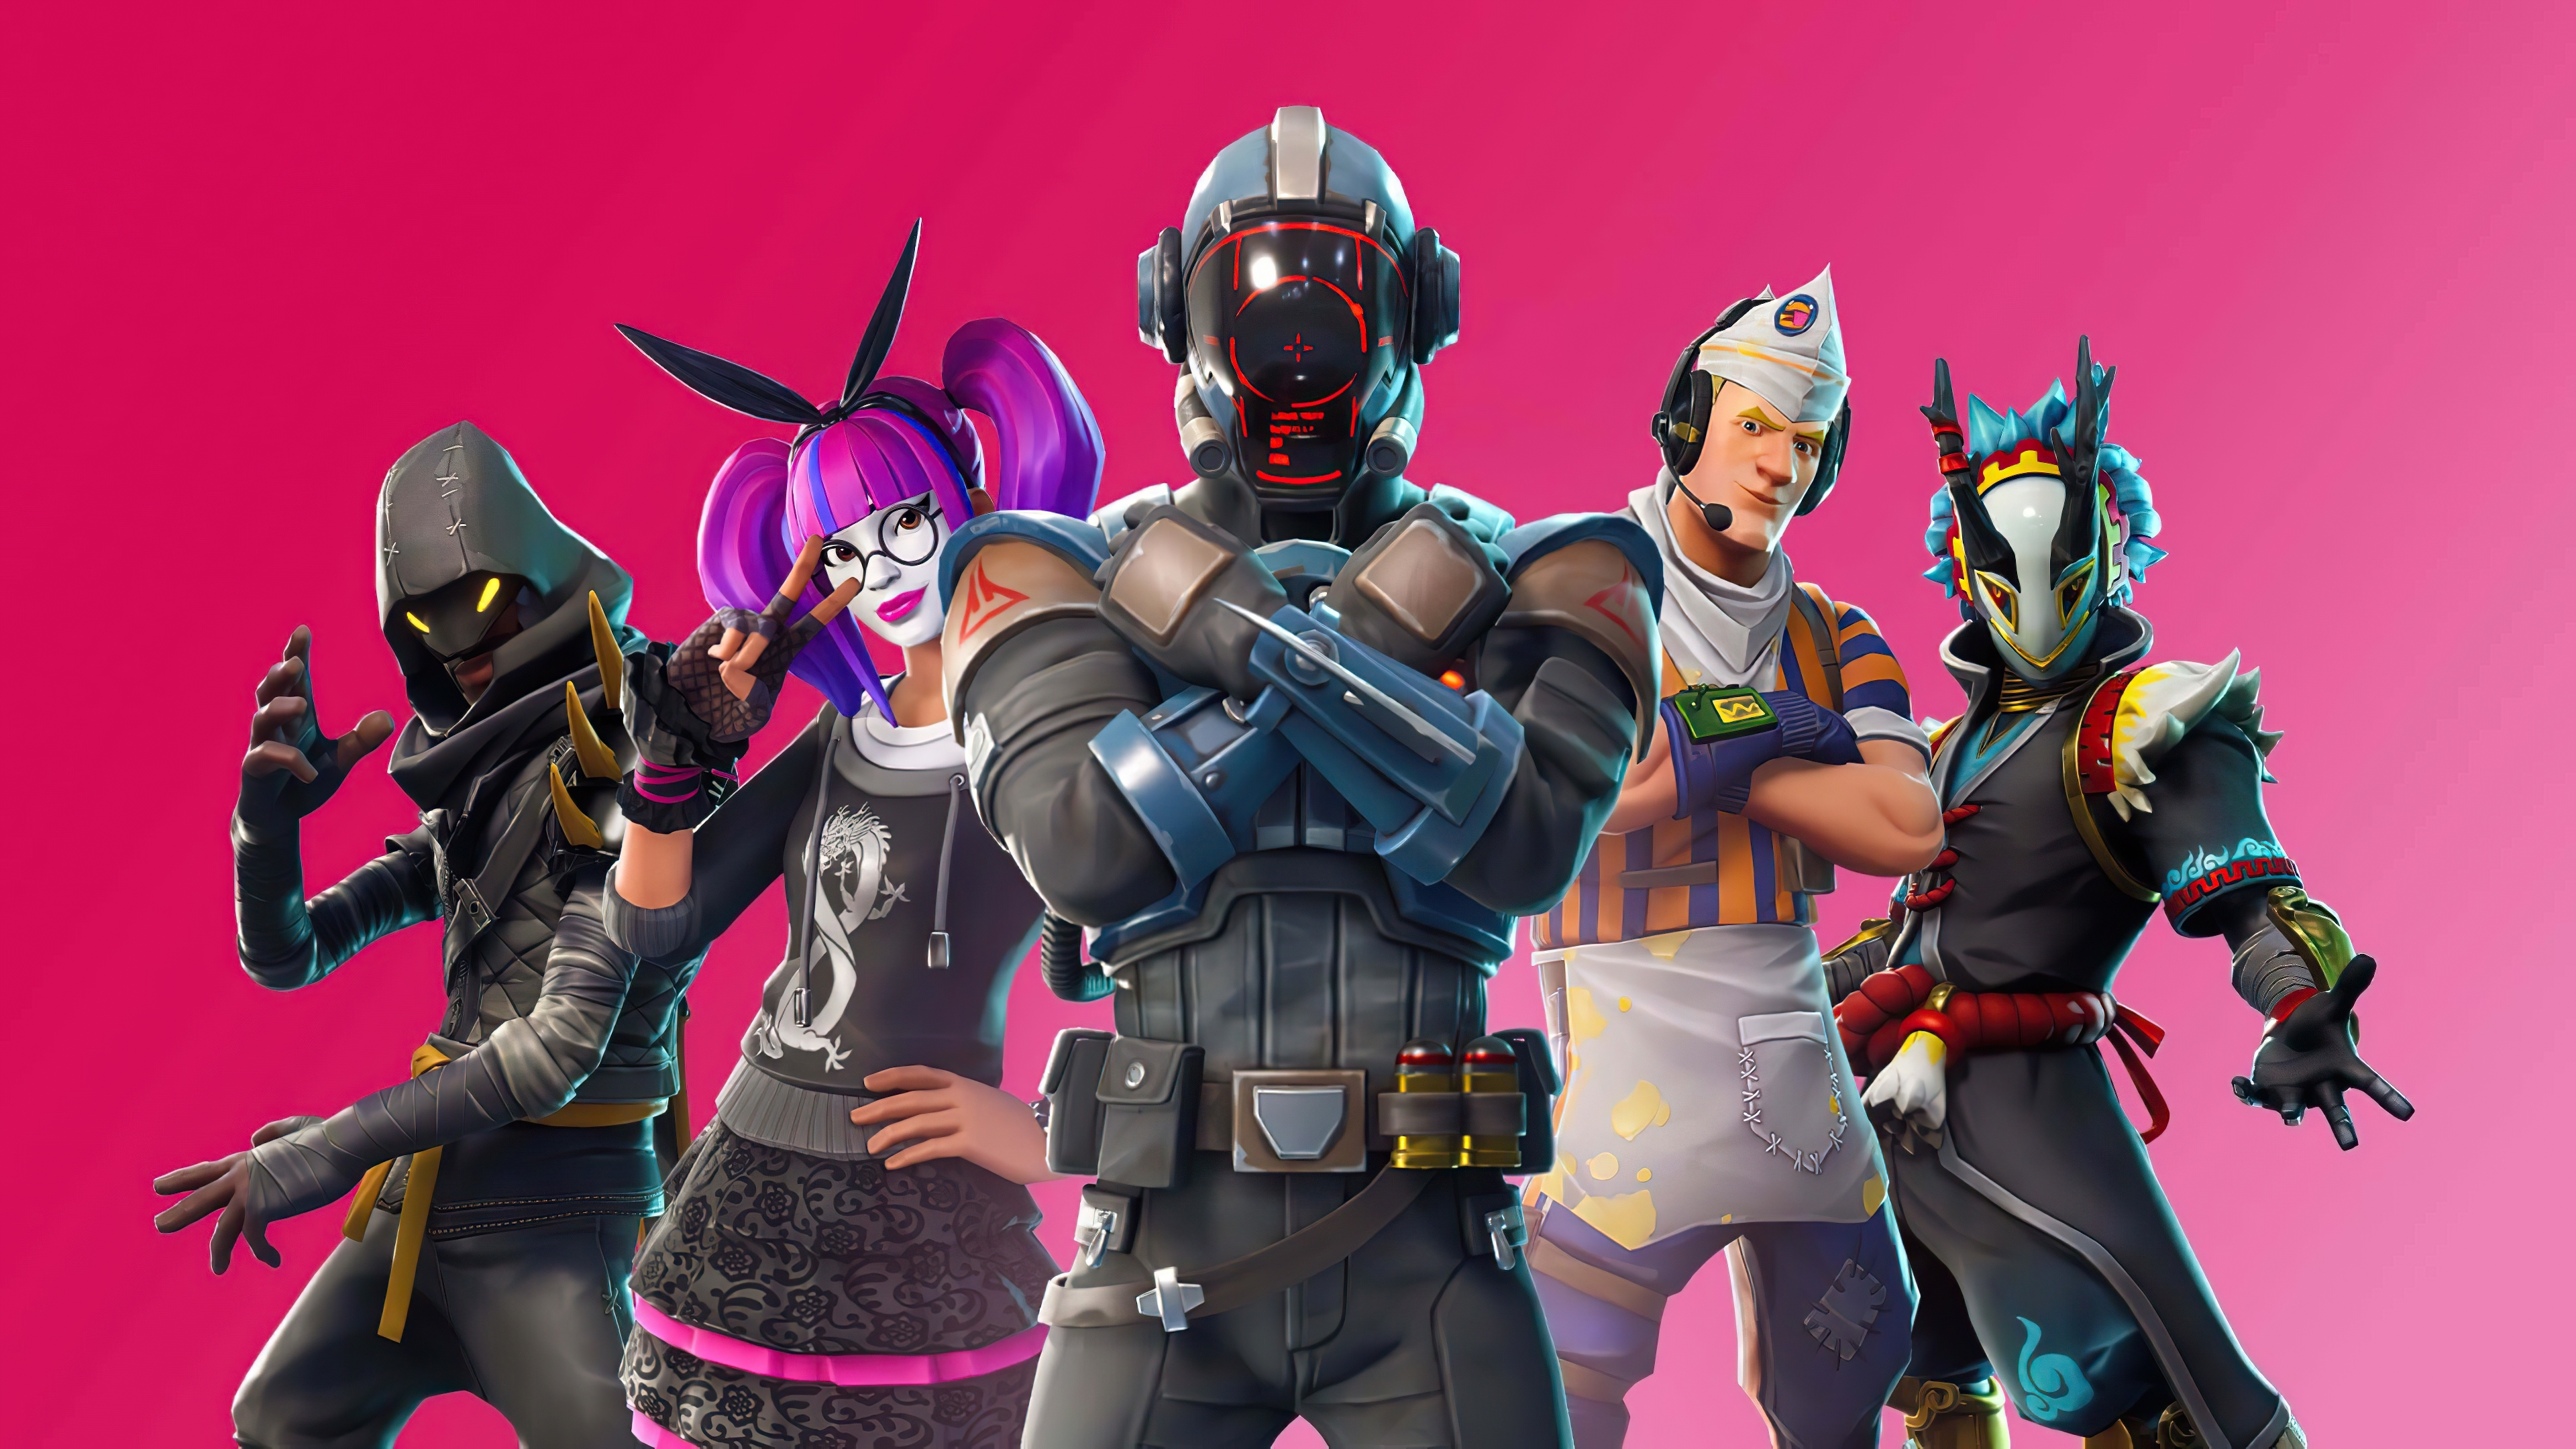 Epic Games Faces Criticism Over AI Bots in Fortnite